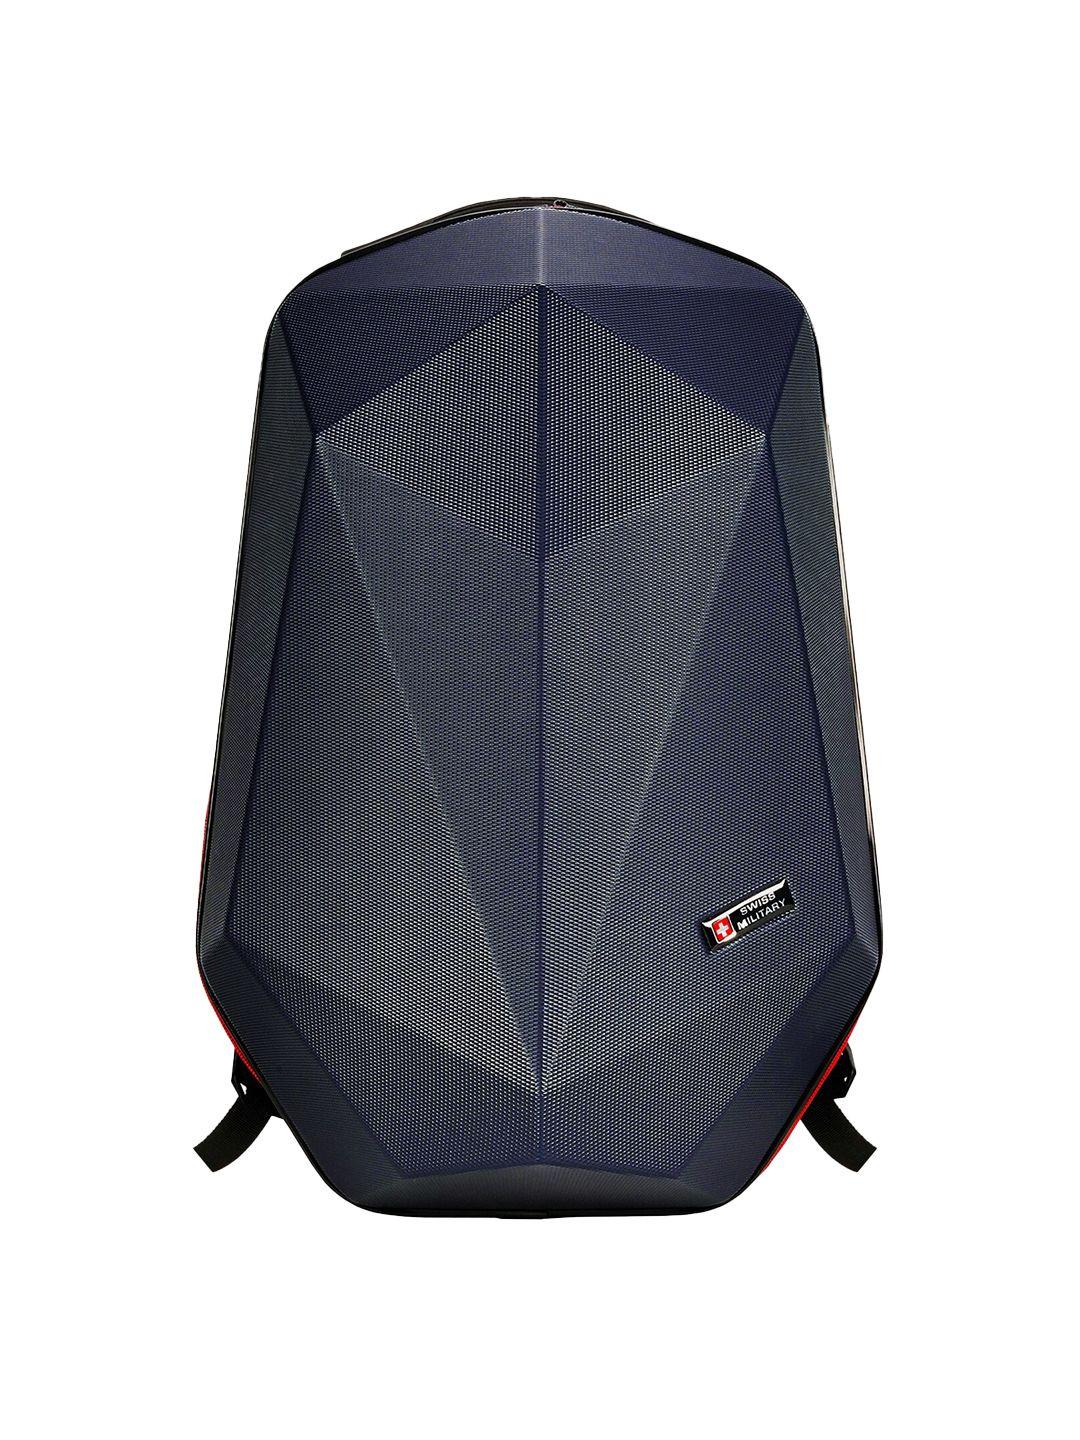 swiss military unisex blue & red tasselled backpack with anti-theft